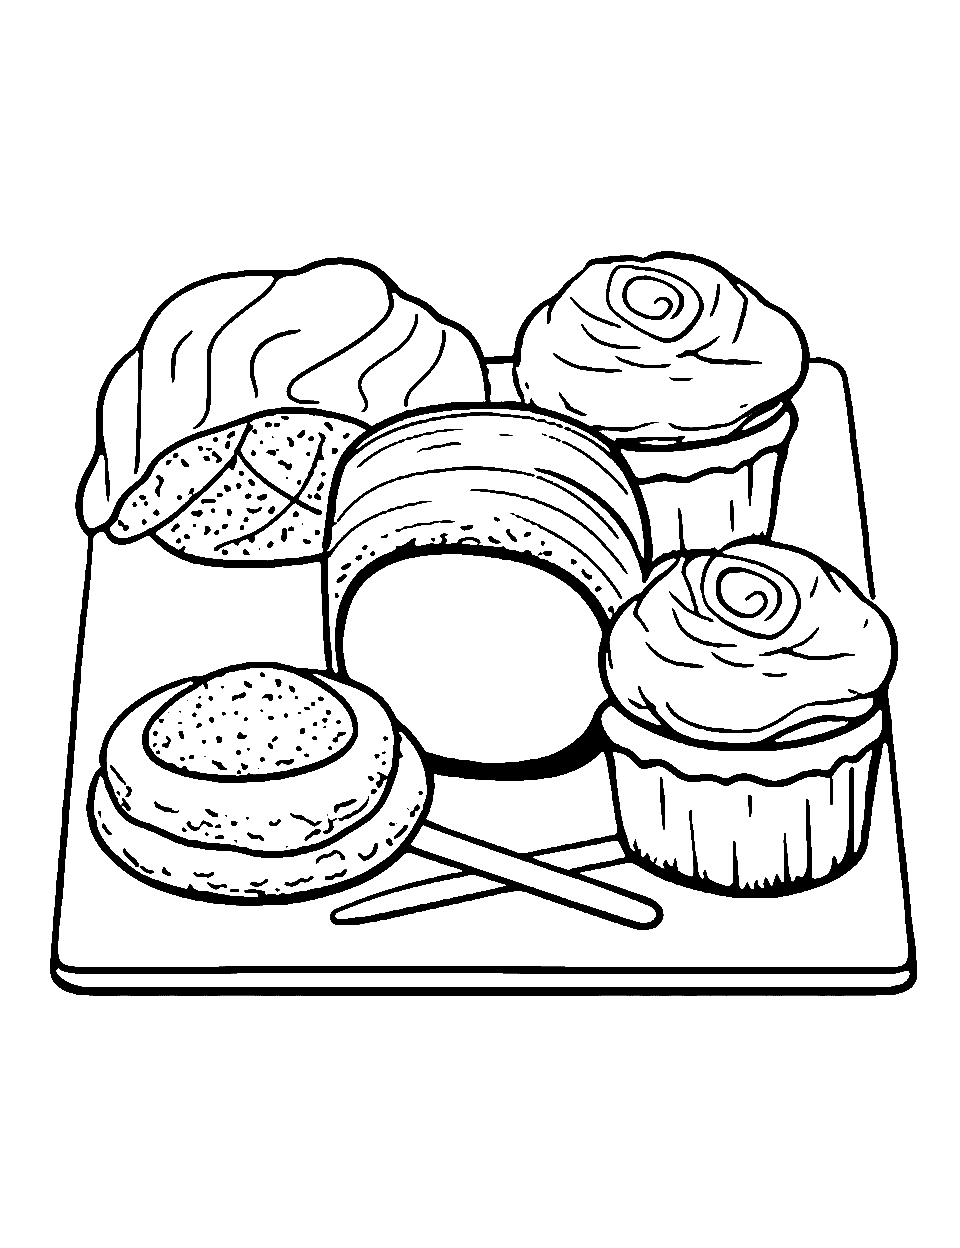 Sushi Feast Food Coloring Page - Assorted sushi rolls on a bamboo mat.